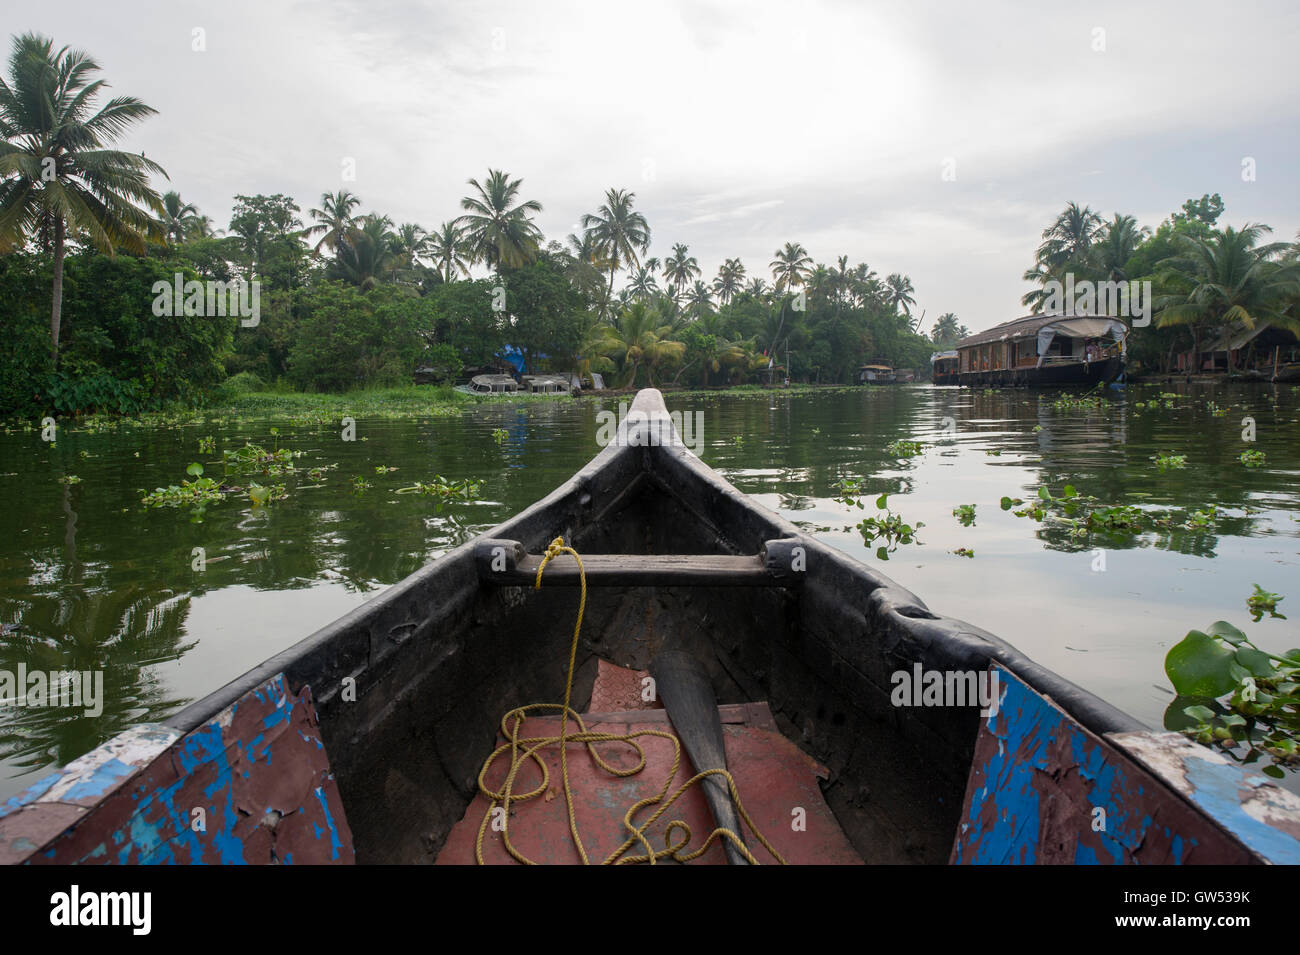 Travelling the back waters in a small traditional boat in Alappuzha (Alleppey), Kerala, Southern India Stock Photo